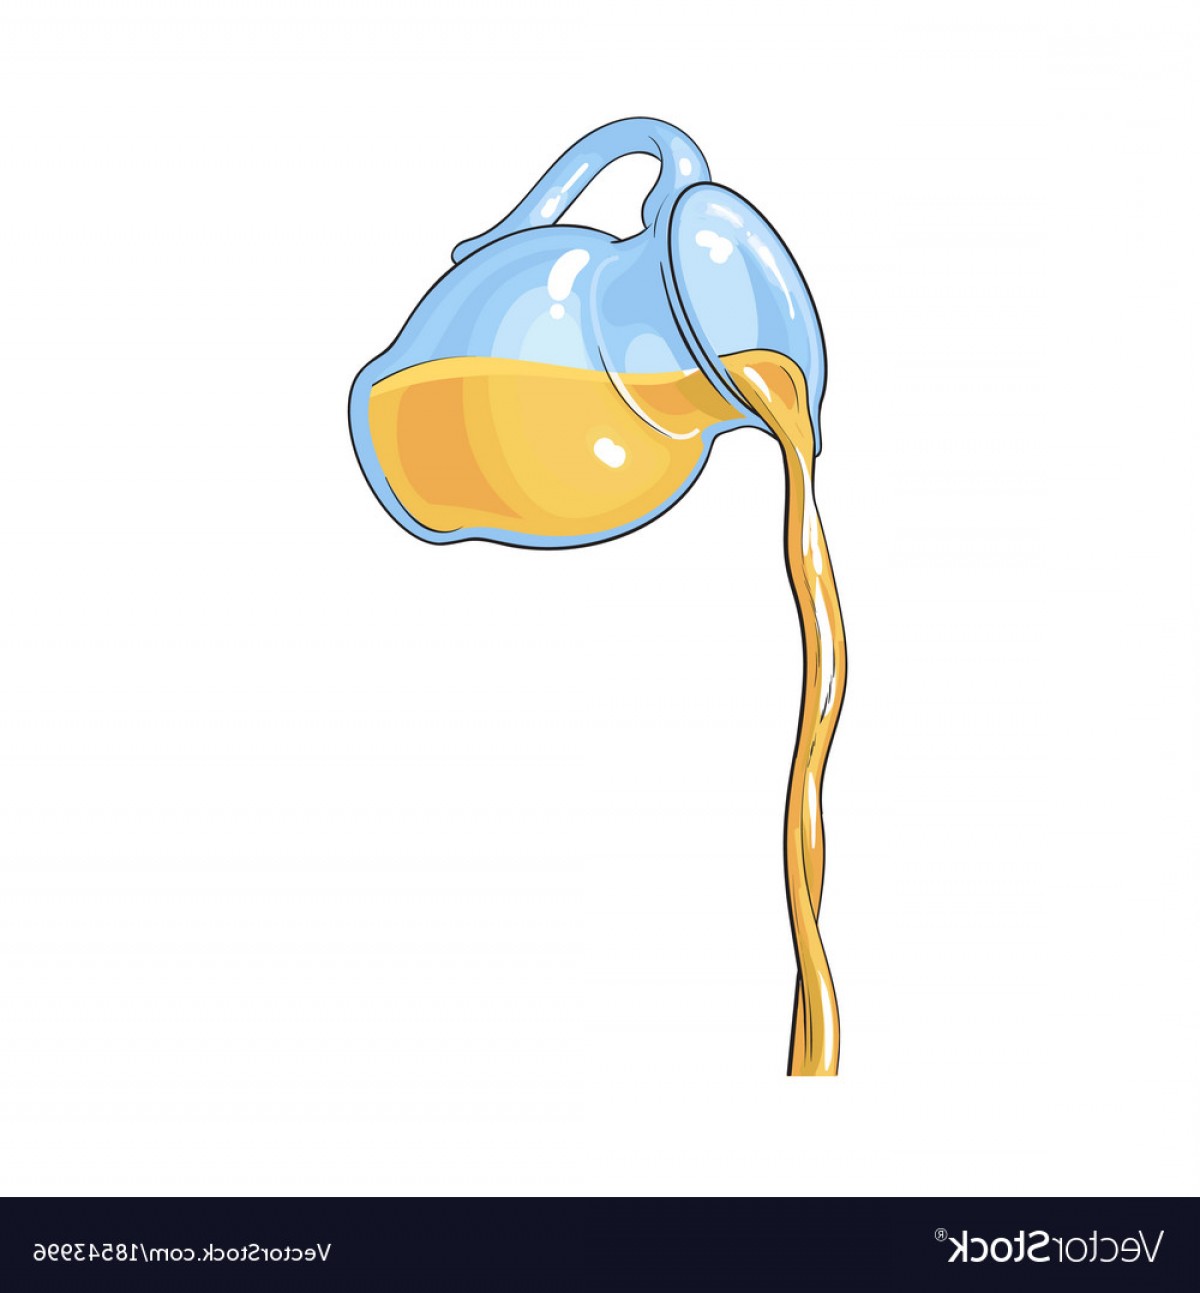 Drawing Of Orange Juice Pouring From Glass Jar Vector